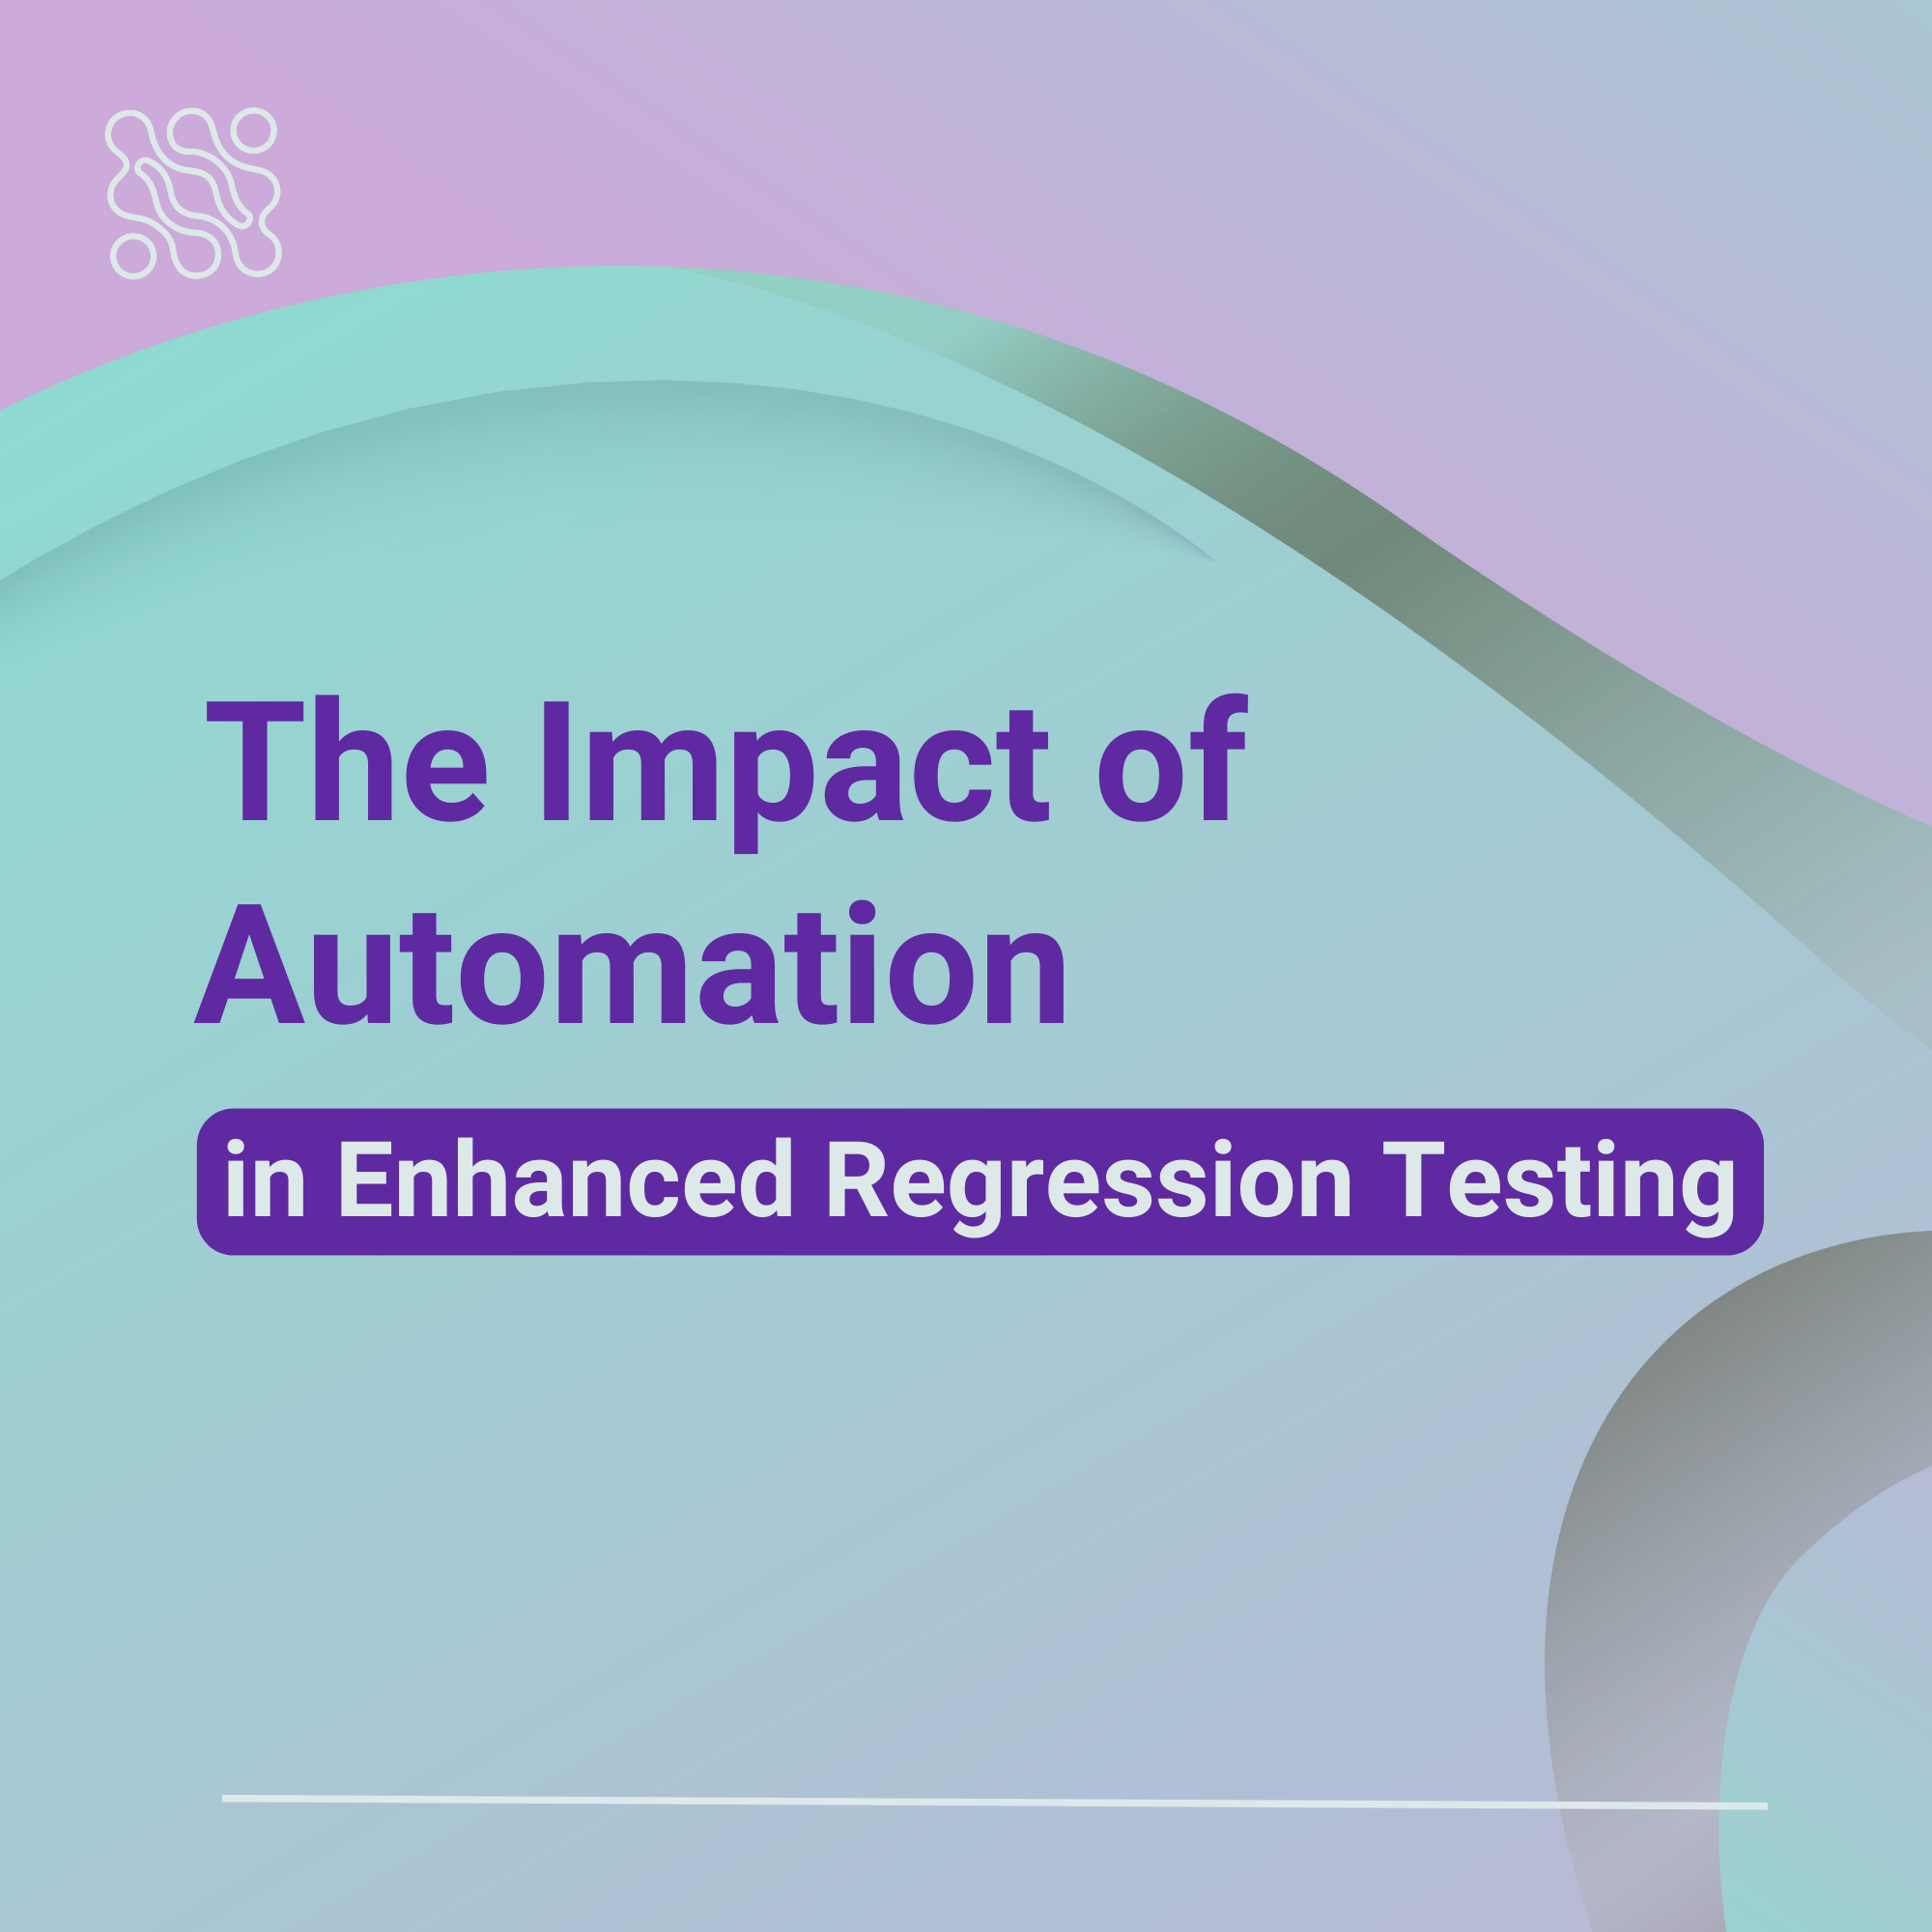 The Impact of Automation in Enhanced Regression Testing